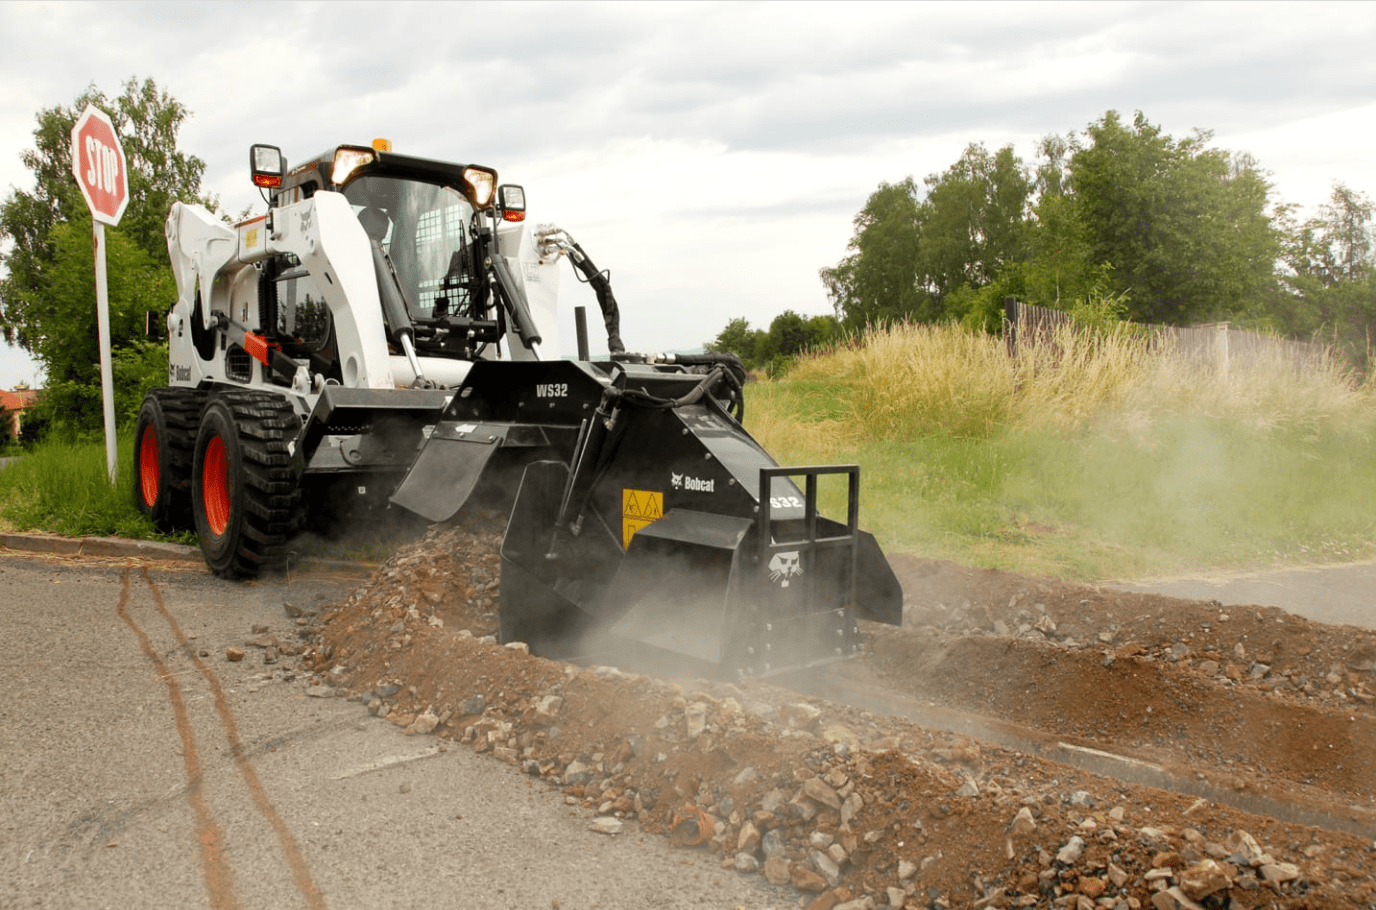 Browse Specs and more for the S850 Skid-Steer Loader - Bobcat of North Texas